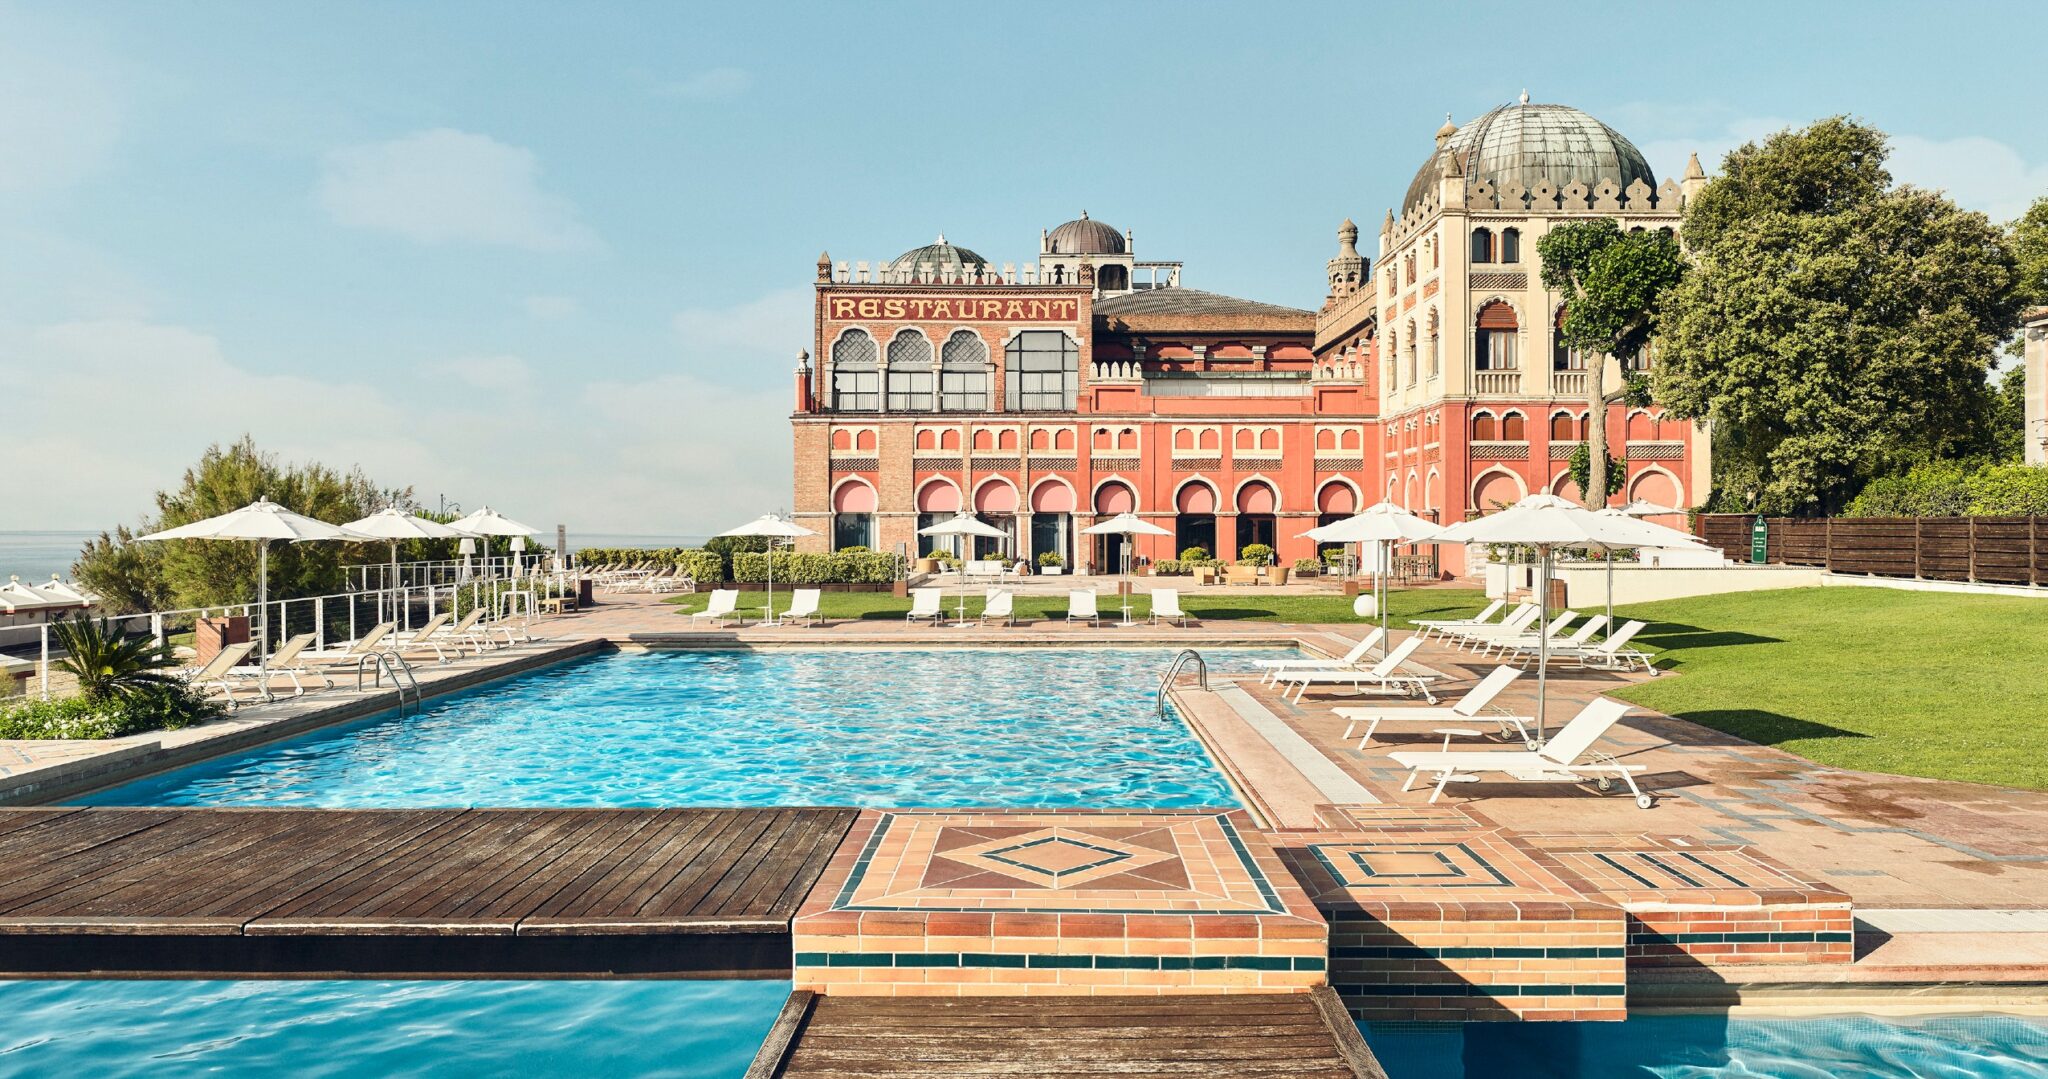 This Iconic Hotel Is The Home to the Famed Venice Film Festival